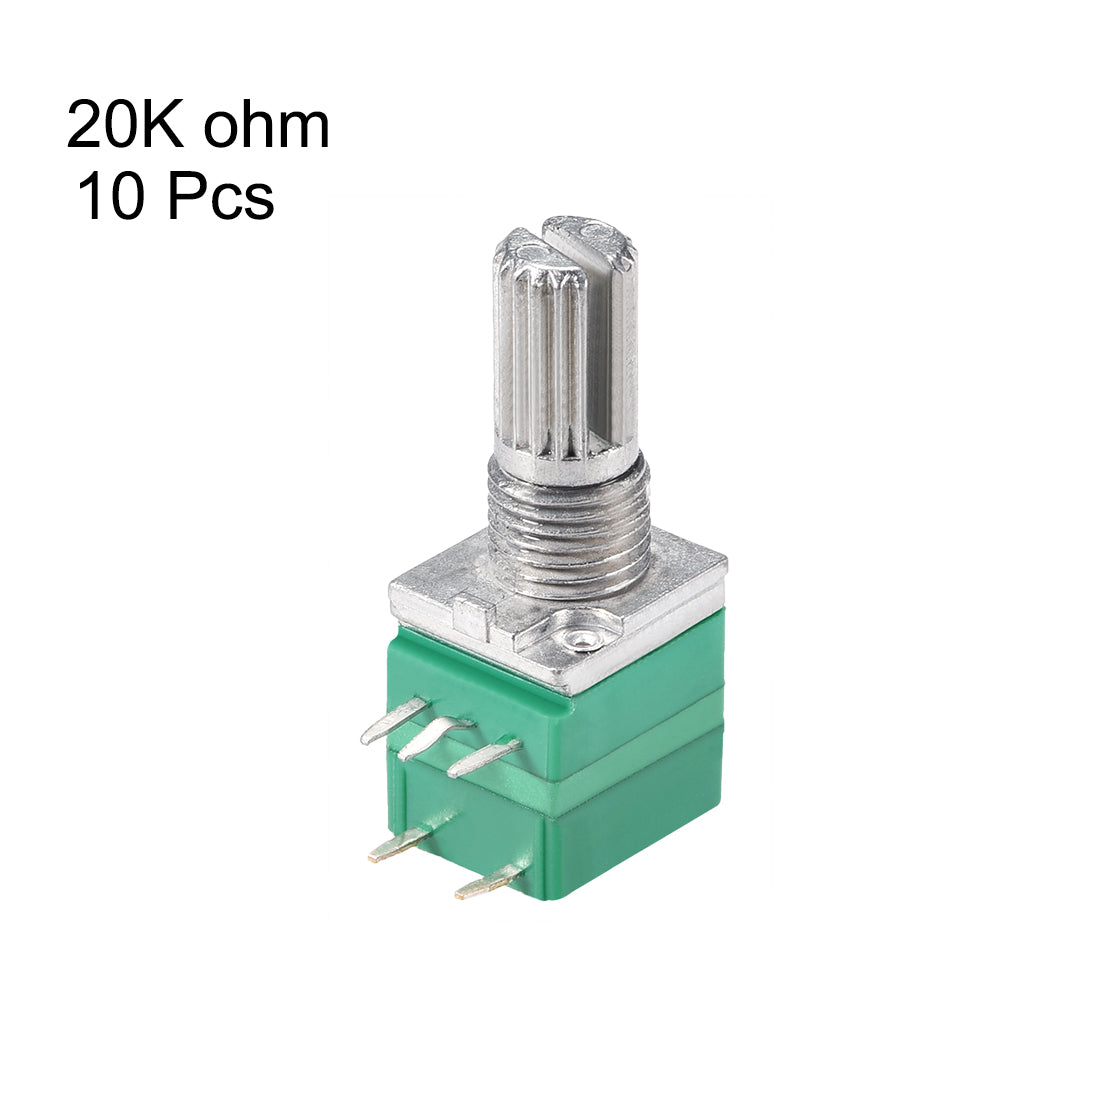 uxcell Uxcell Potentiometer With Switch  B20K Ohm Variable Resistors Single Turn Rotary Carbon Film Taper RV097NS 10pcs